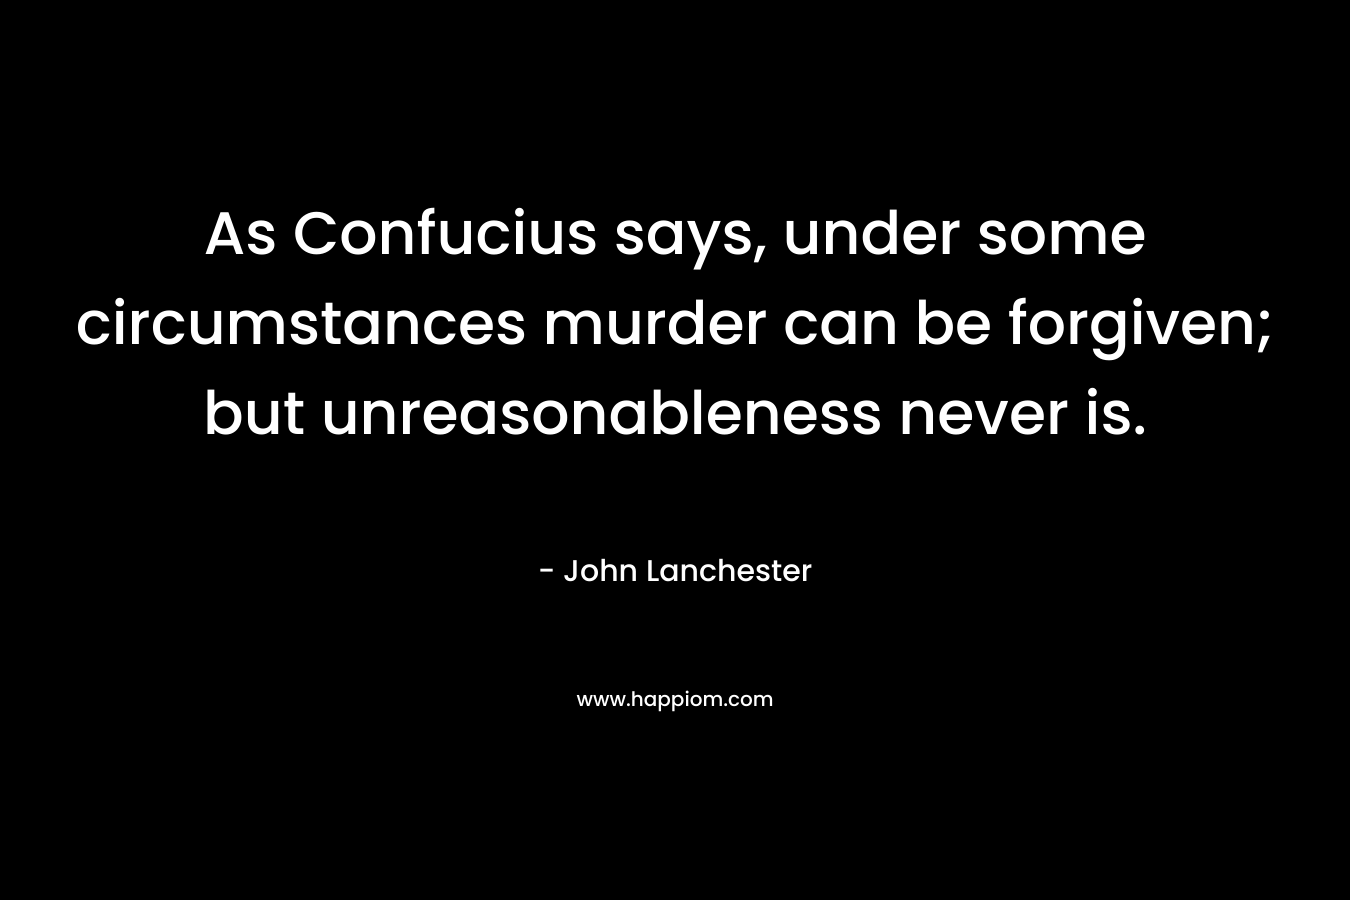 As Confucius says, under some circumstances murder can be forgiven; but unreasonableness never is. – John Lanchester